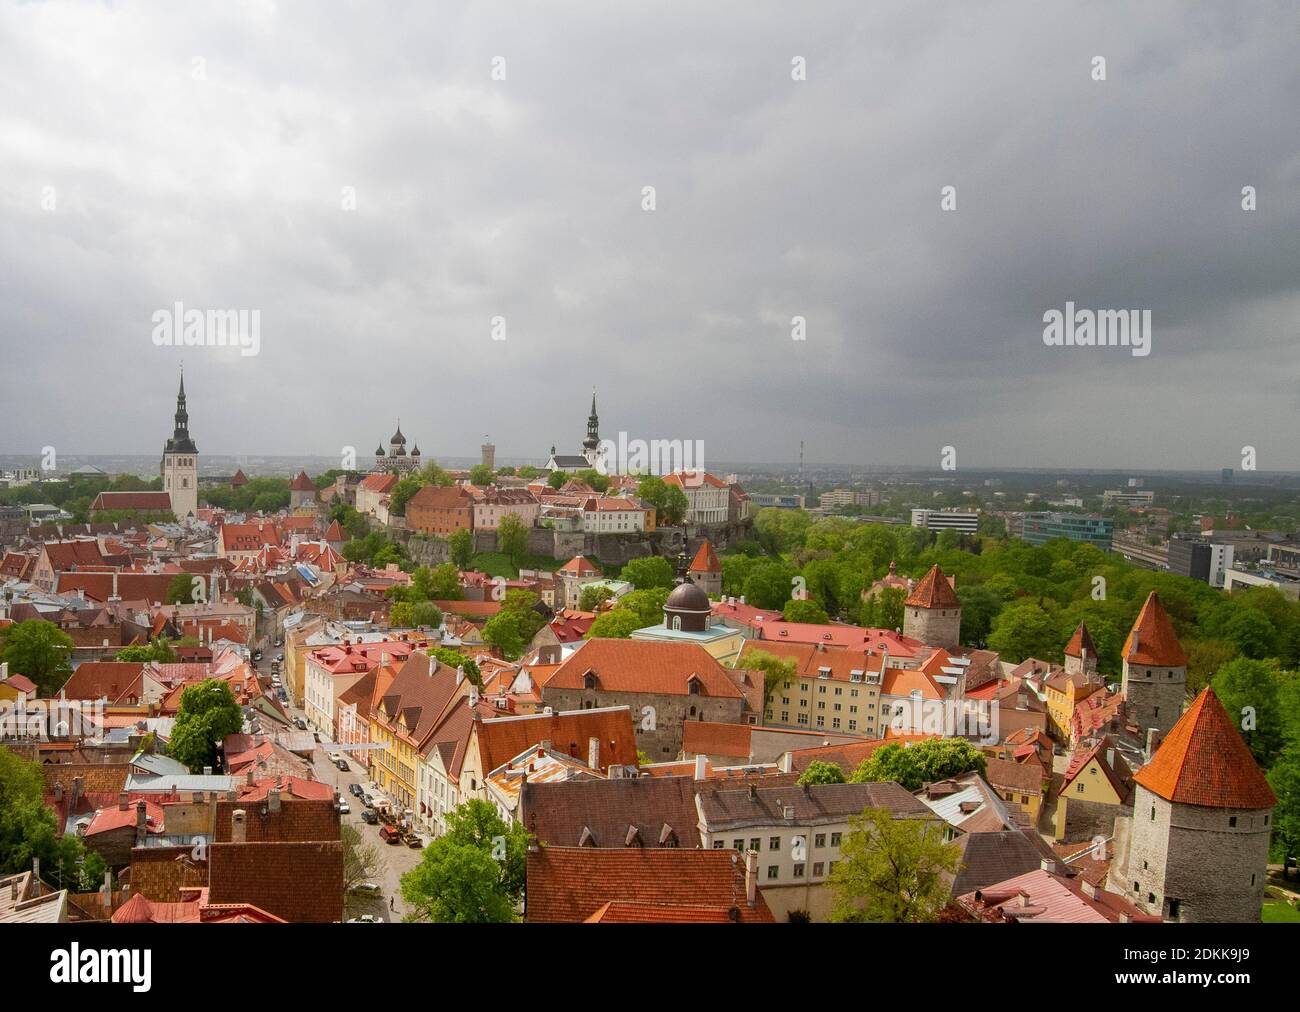 Tallinn in spring, city landscape of green trees and sunlit terracotta rooftops, city walls and church spires in Old Town Tallinn viewed from St Olafs. Stock Photo